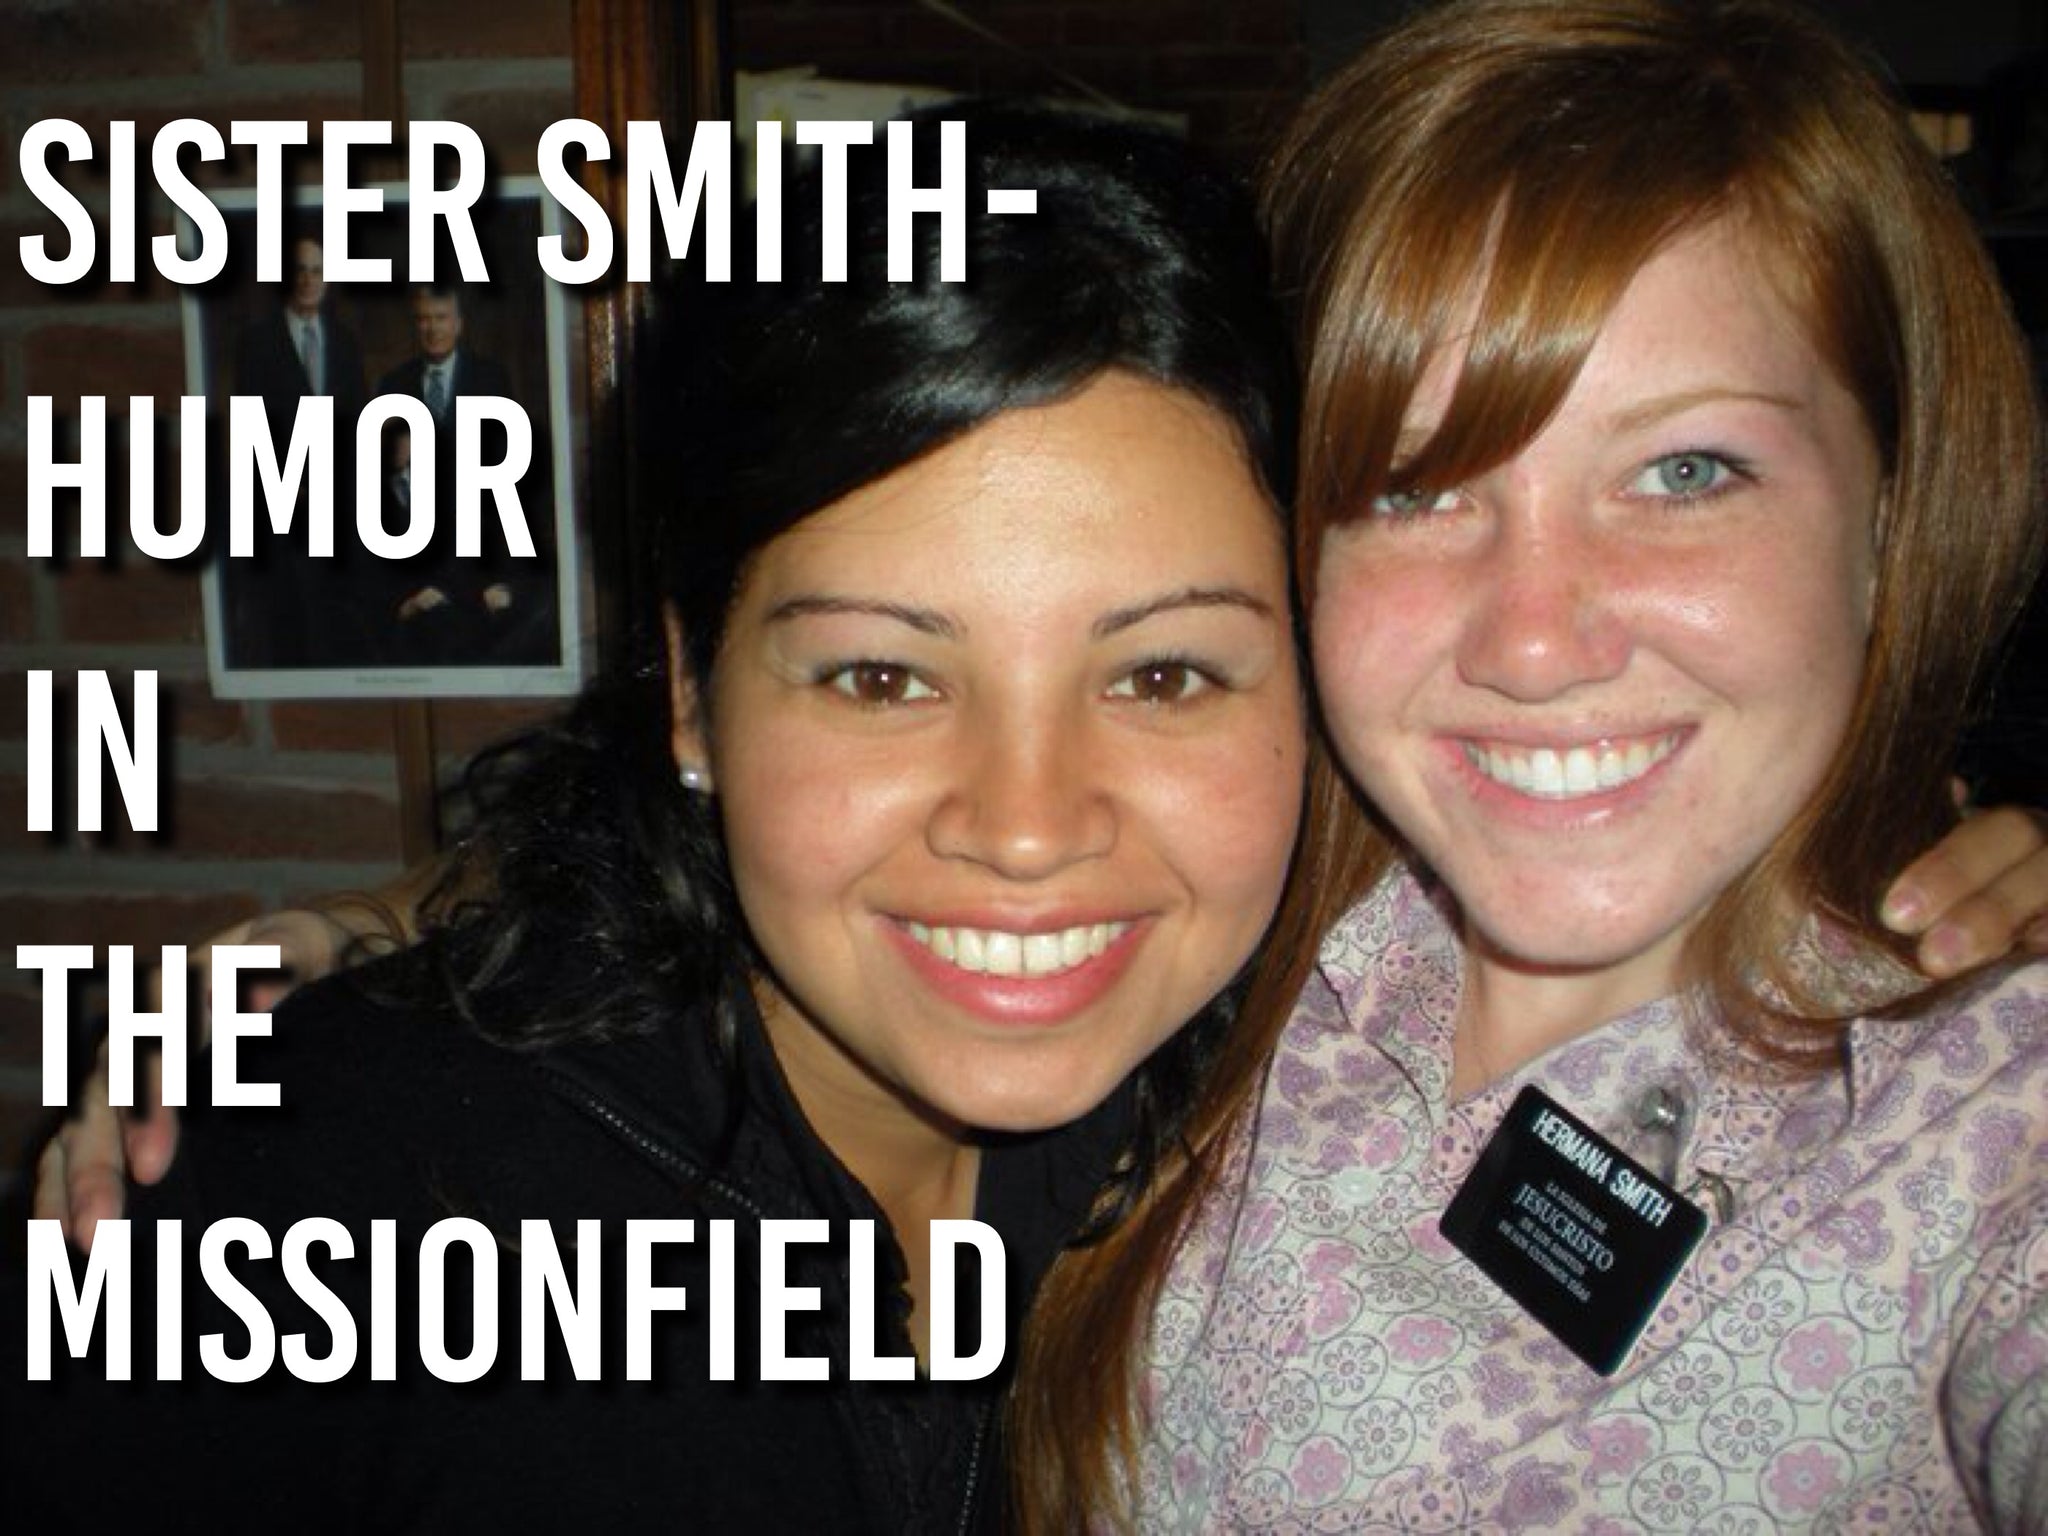 Sister Smith- Humor in the Missionfield